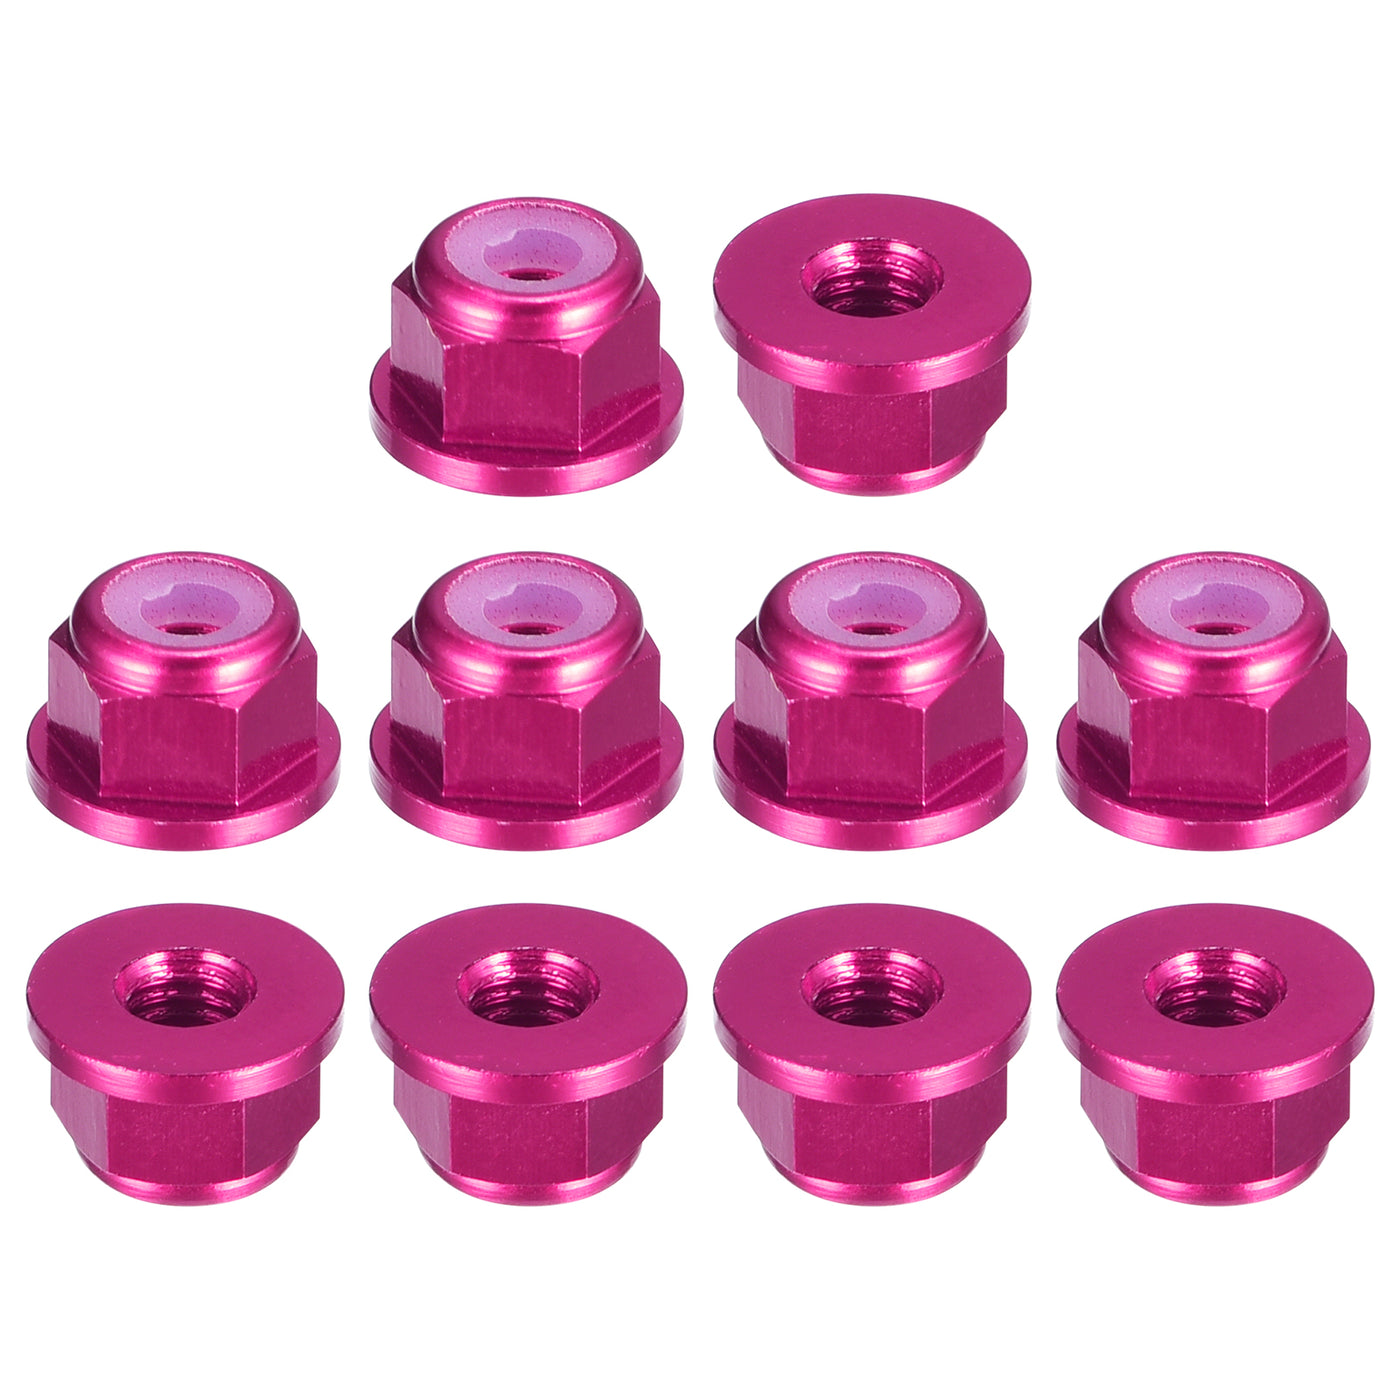 uxcell Uxcell Nylon Insert Hex Lock Nuts, 10pcs - M2 x 0.4mm Aluminum Alloy Self-Locking Nut, Anodizing Flange Lock Nut for Fasteners (Pink)